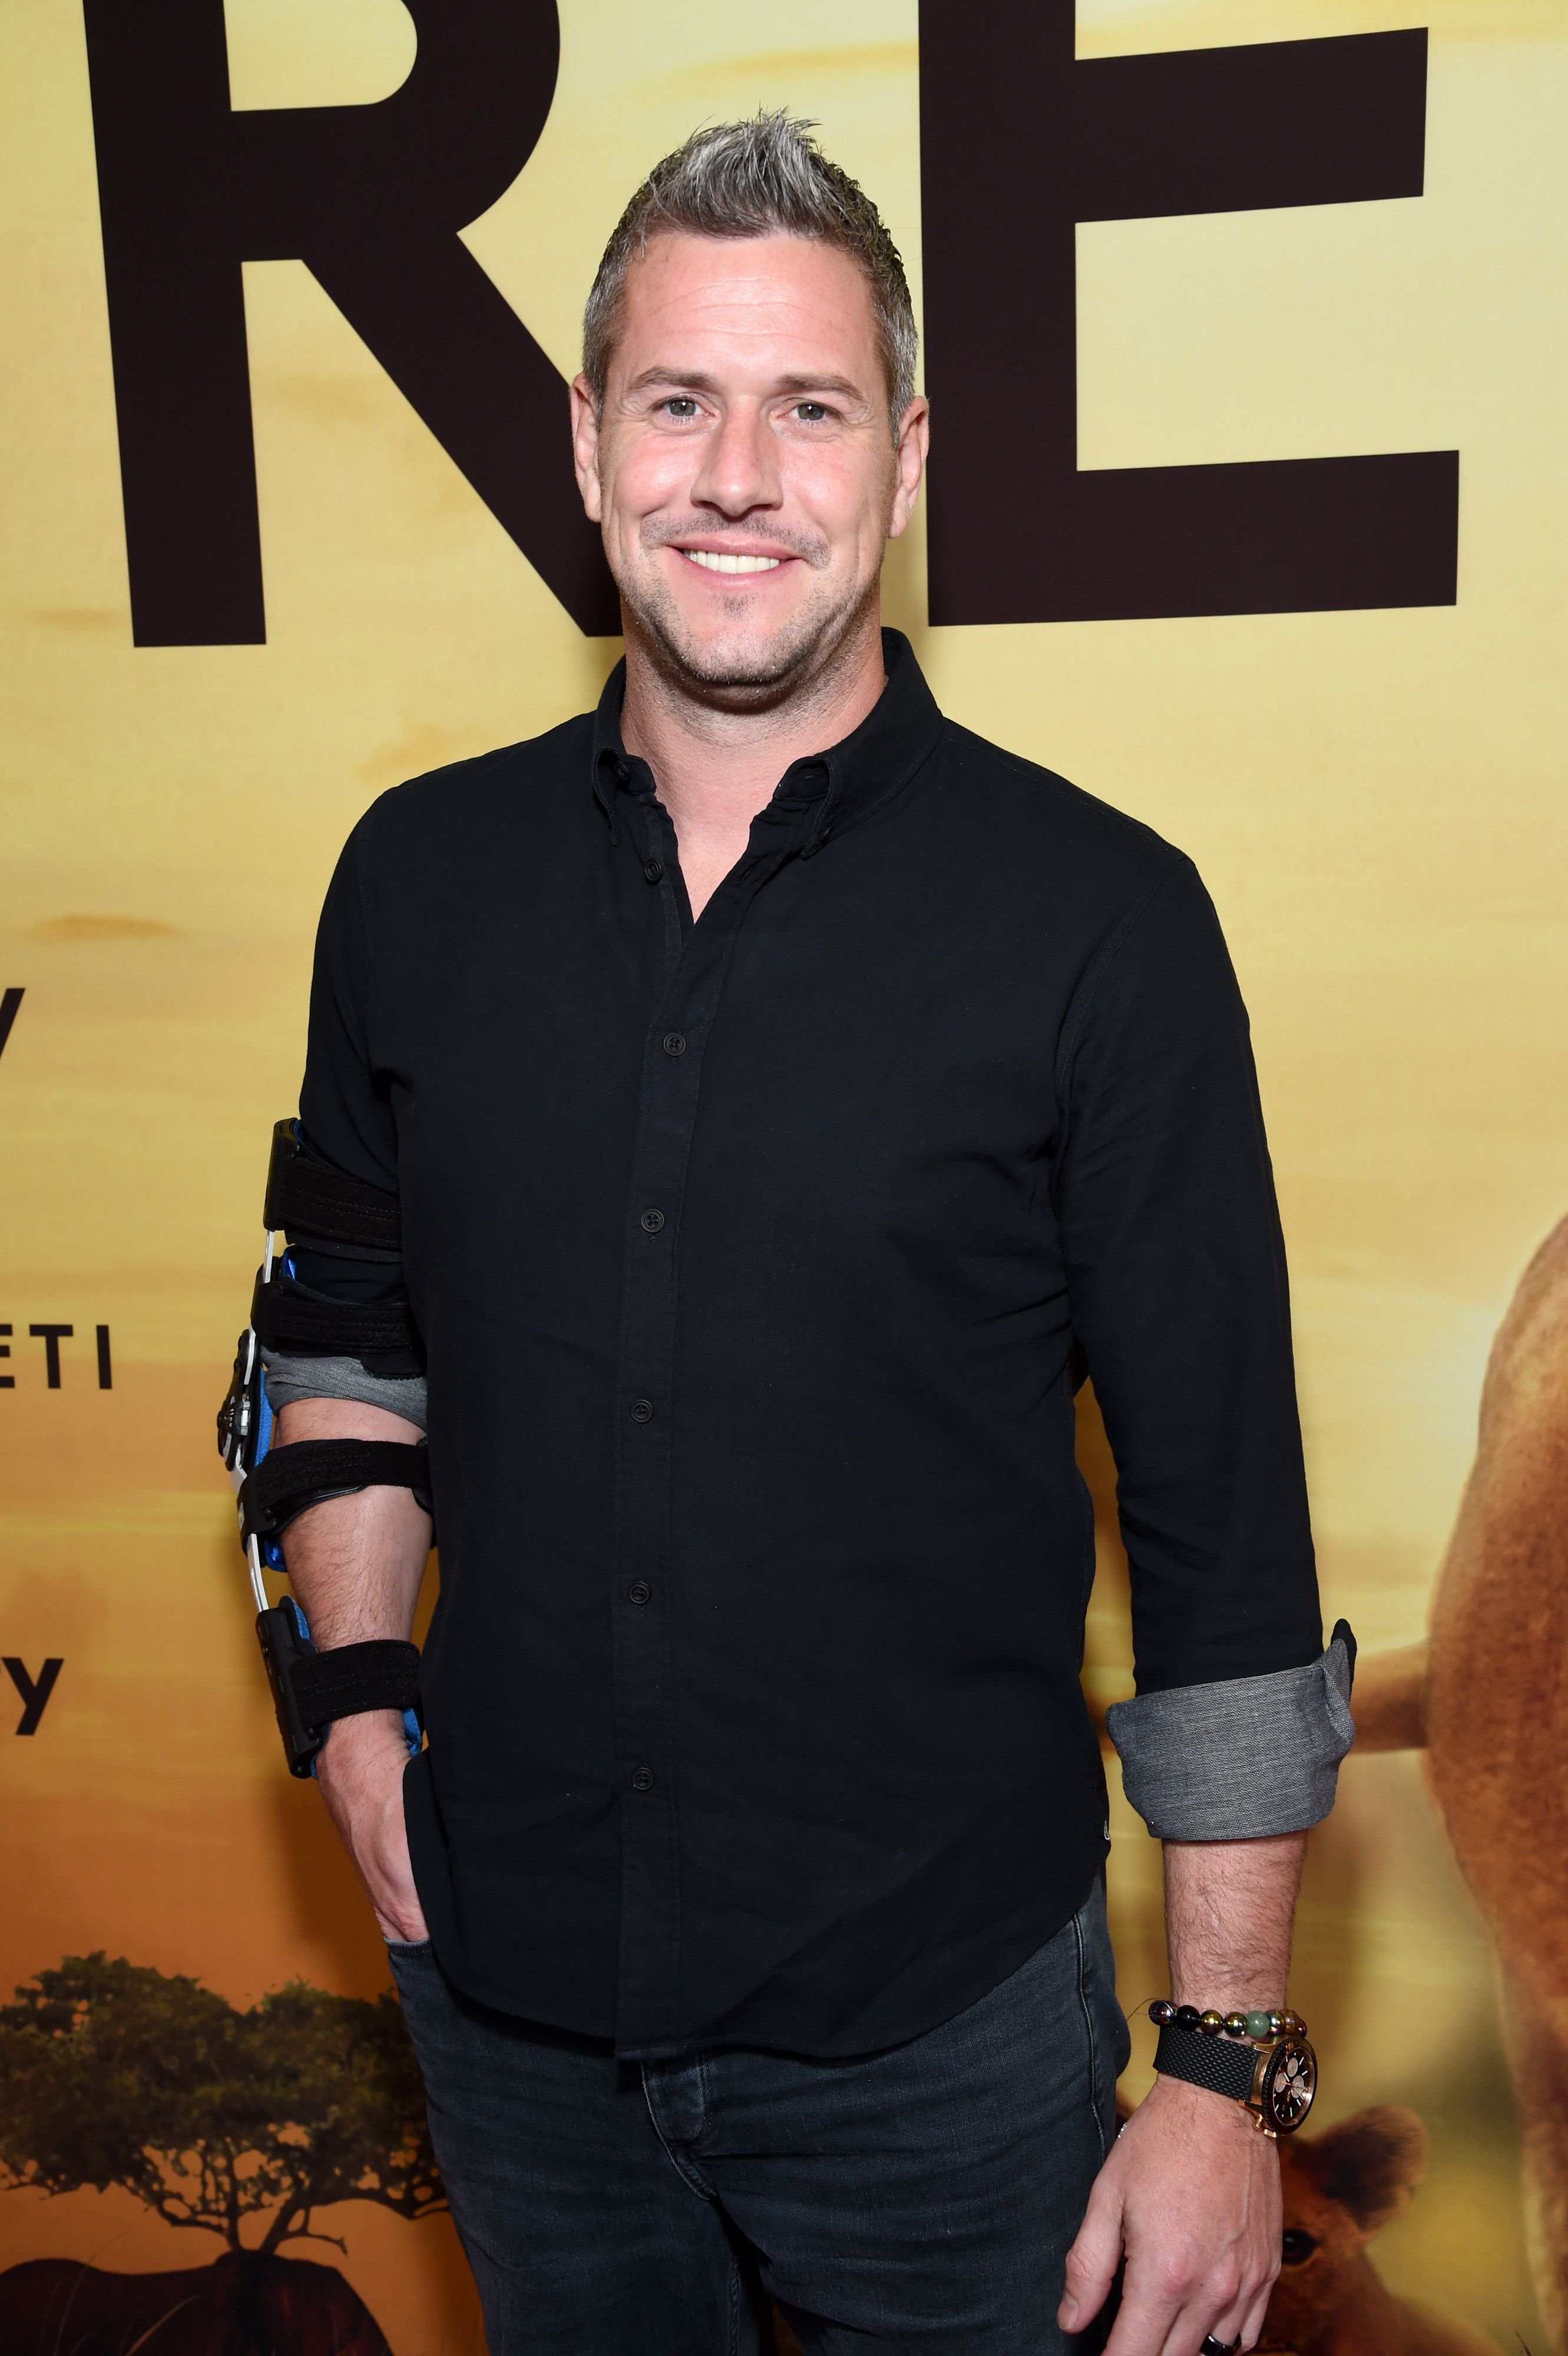 Ant Anstead at Discovery's "Serengeti" premiere at Wallis Annenberg Center for the Performing Arts on July 23, 2019 in Beverly Hills, California | Photo: Getty Images